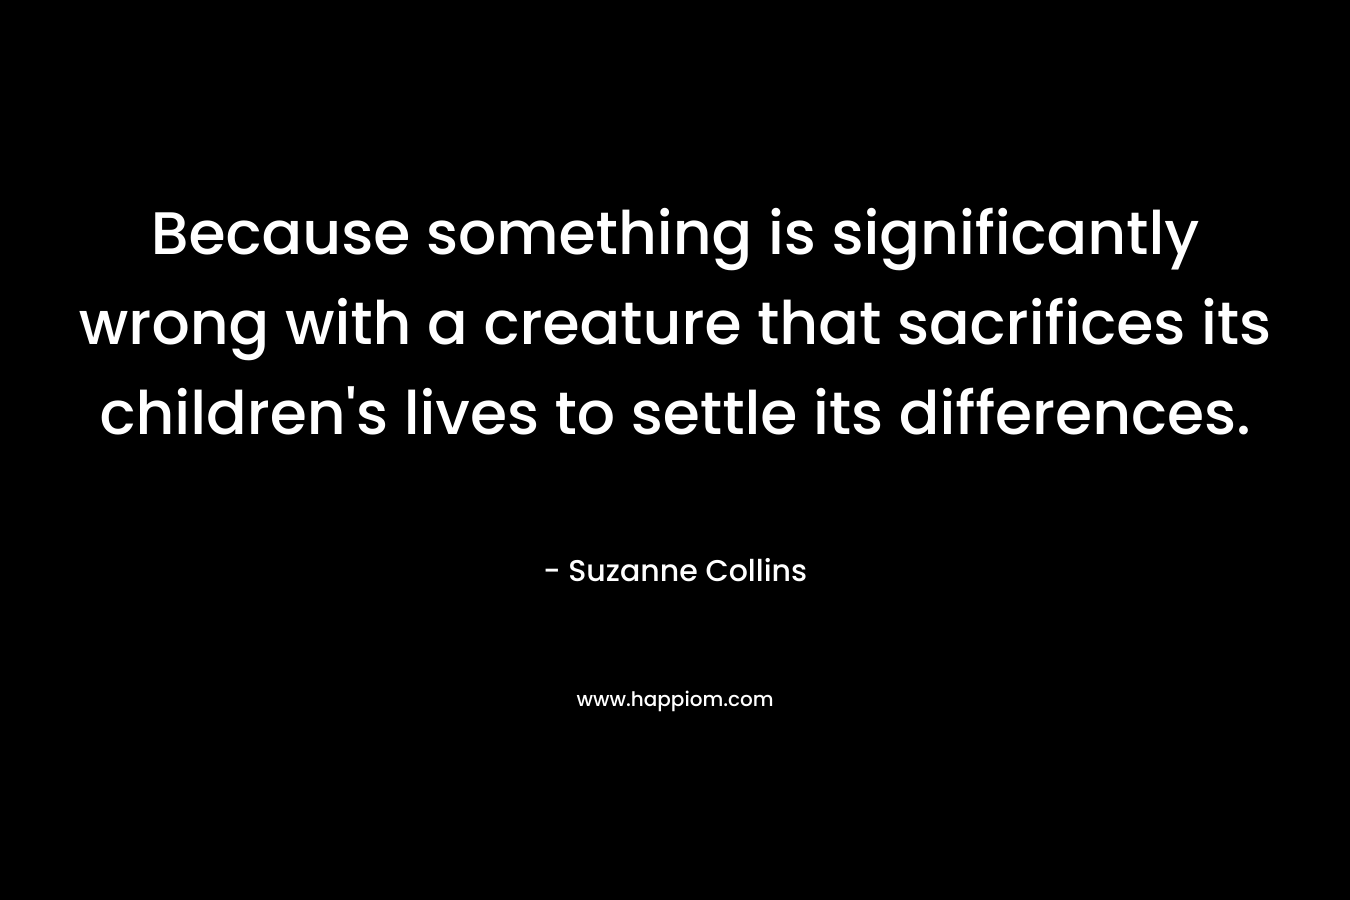 Because something is significantly wrong with a creature that sacrifices its children’s lives to settle its differences. – Suzanne Collins